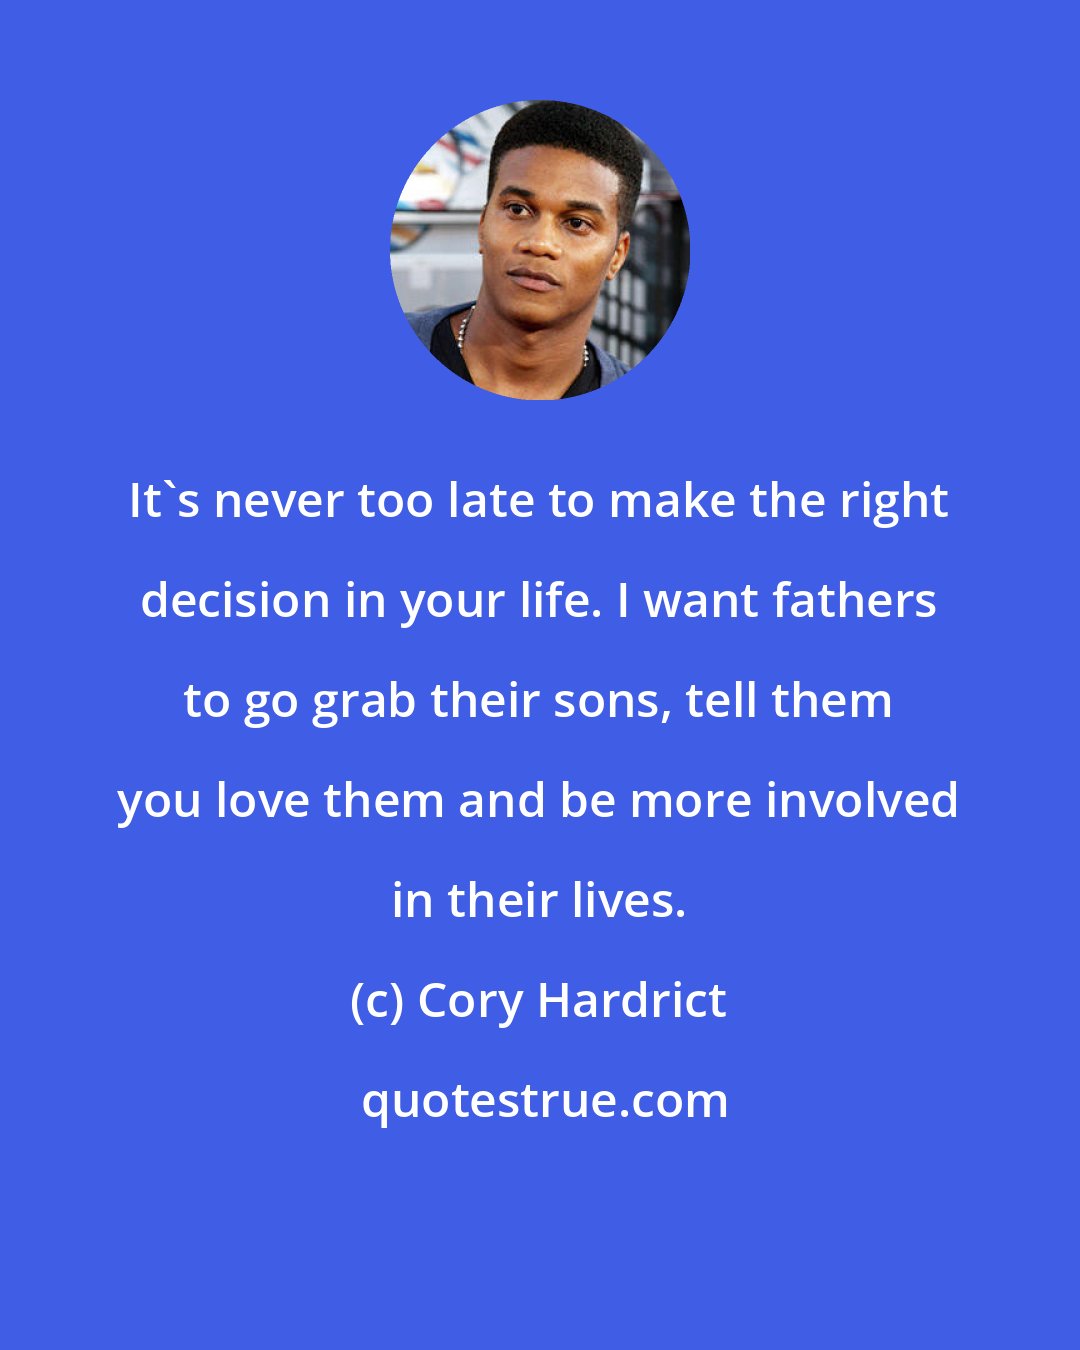 Cory Hardrict: It's never too late to make the right decision in your life. I want fathers to go grab their sons, tell them you love them and be more involved in their lives.